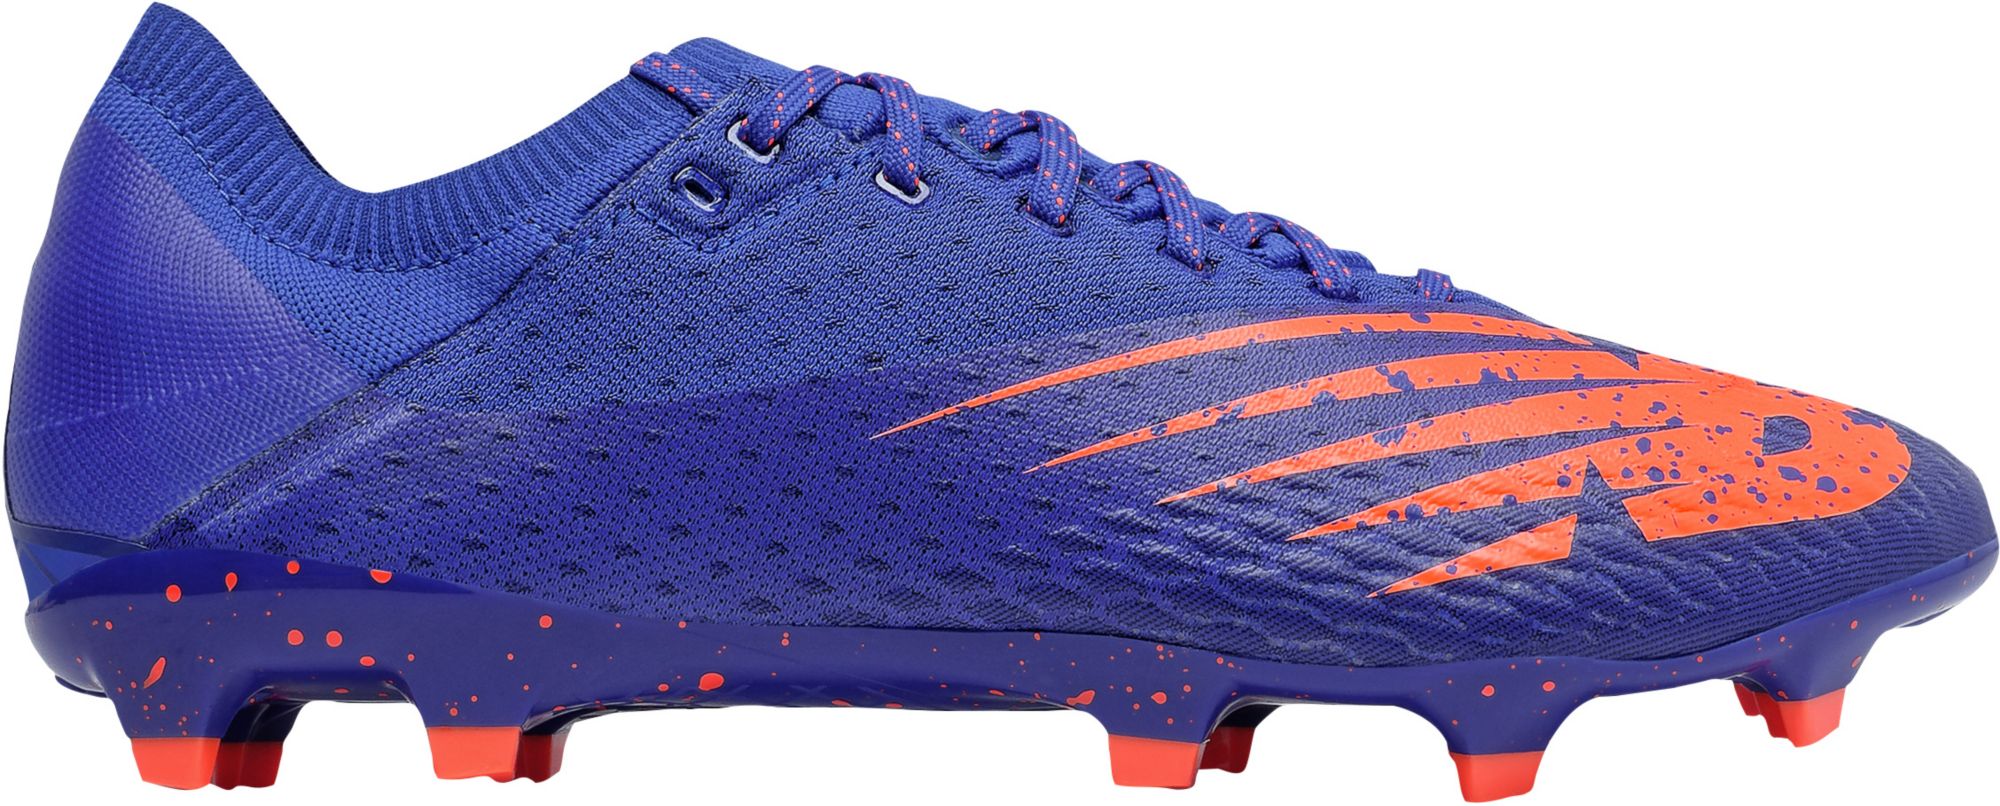 blue and orange soccer cleats